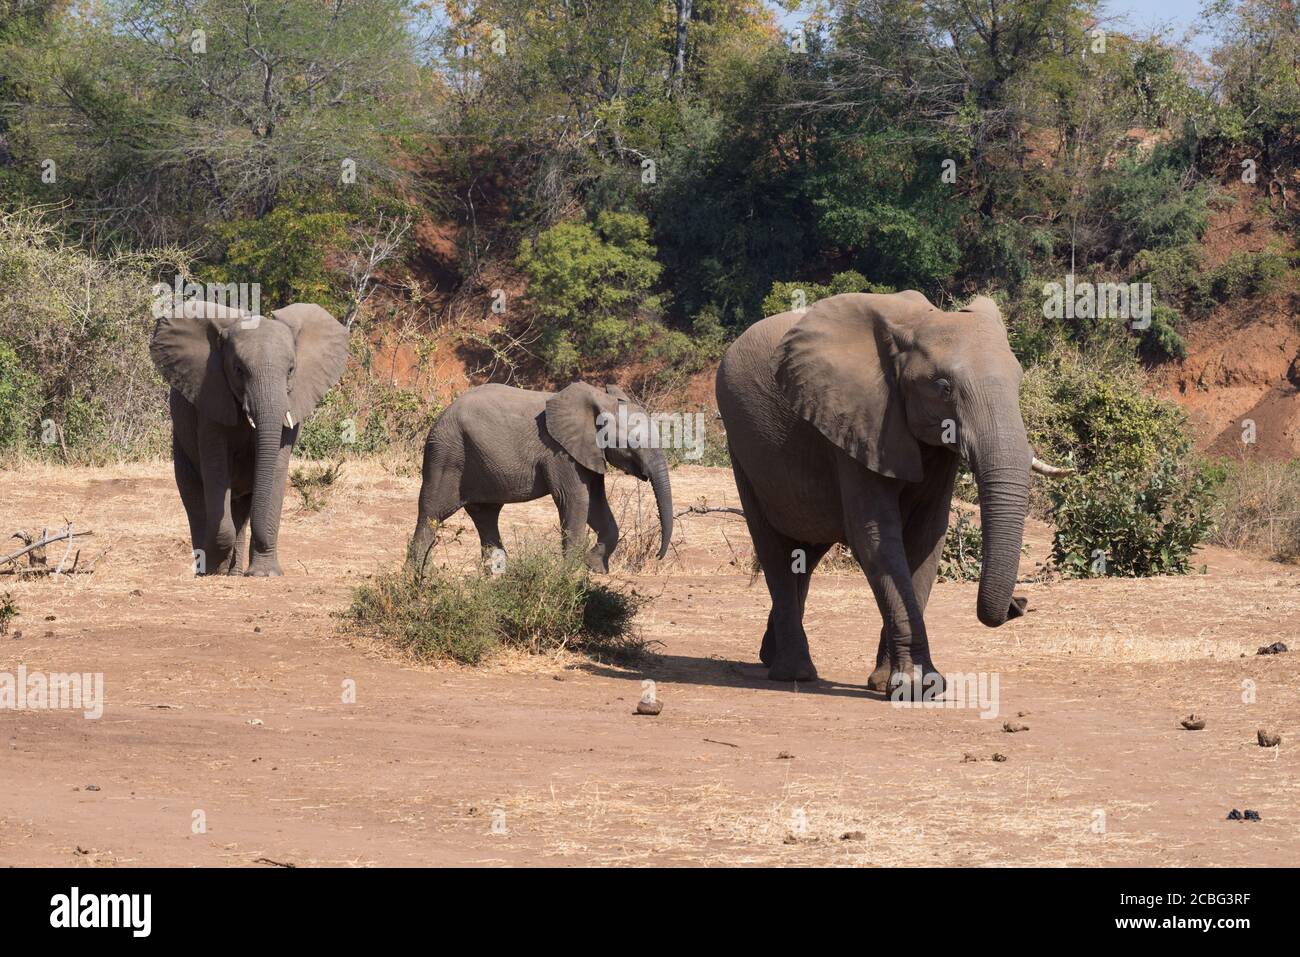 Mother elephant with two different age calves walking next to dry river bed Stock Photo